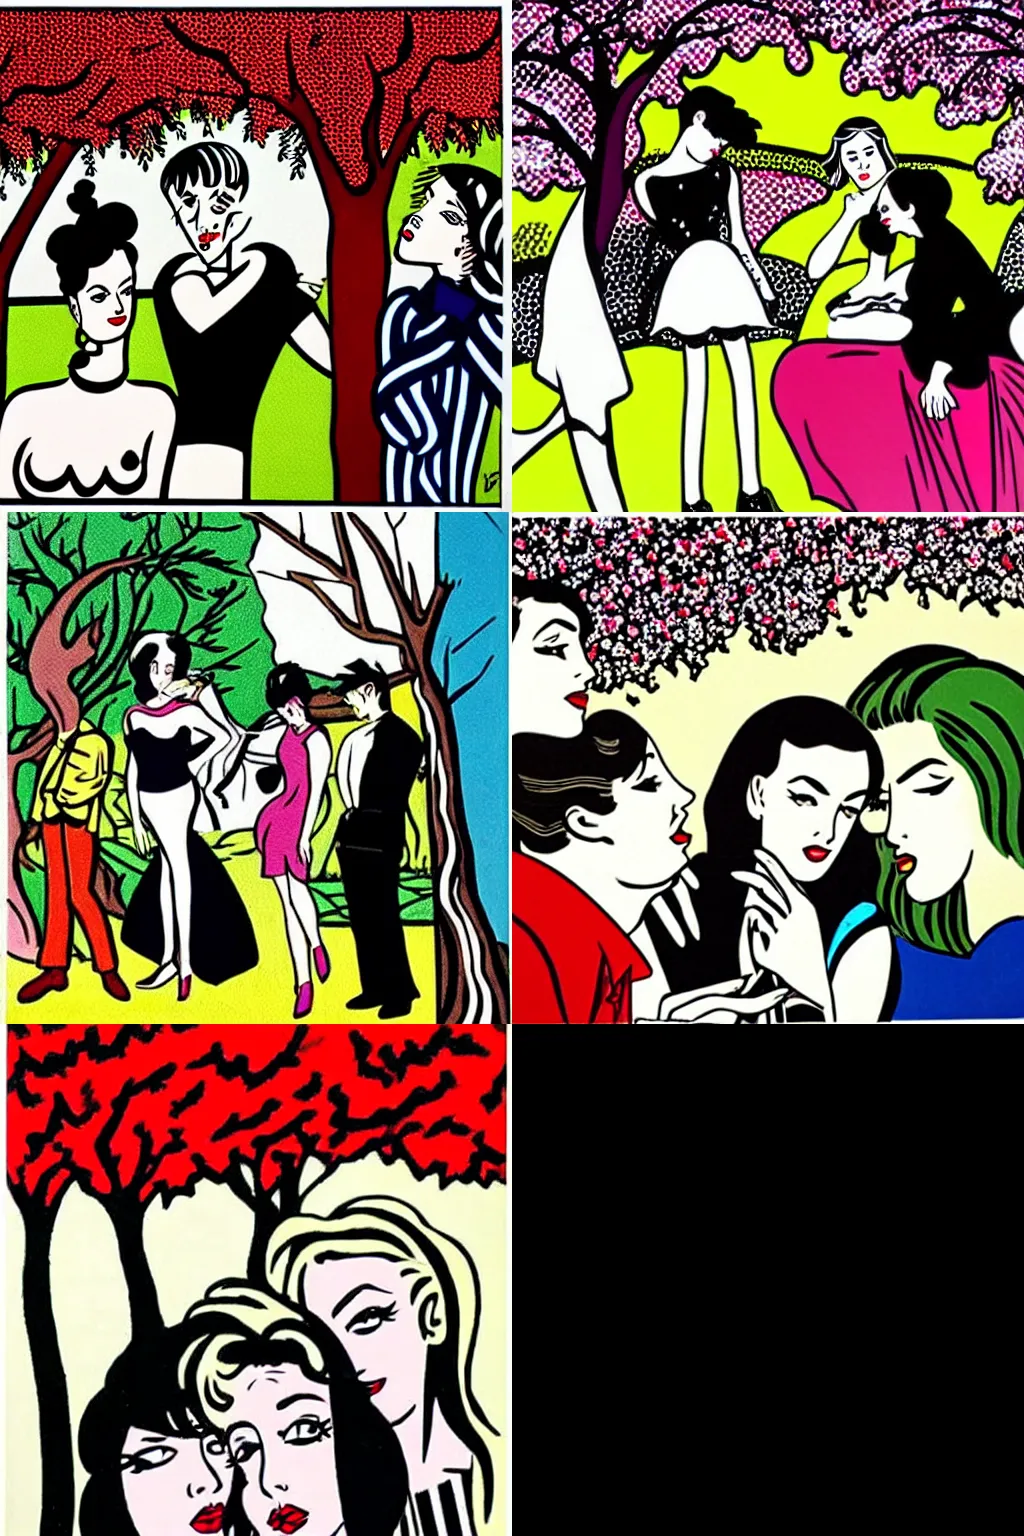 Prompt: an hd painting by roy lichtenstein. three goths loitering in the shade, talking beneath a cherry tree outside a blockbuster video store.